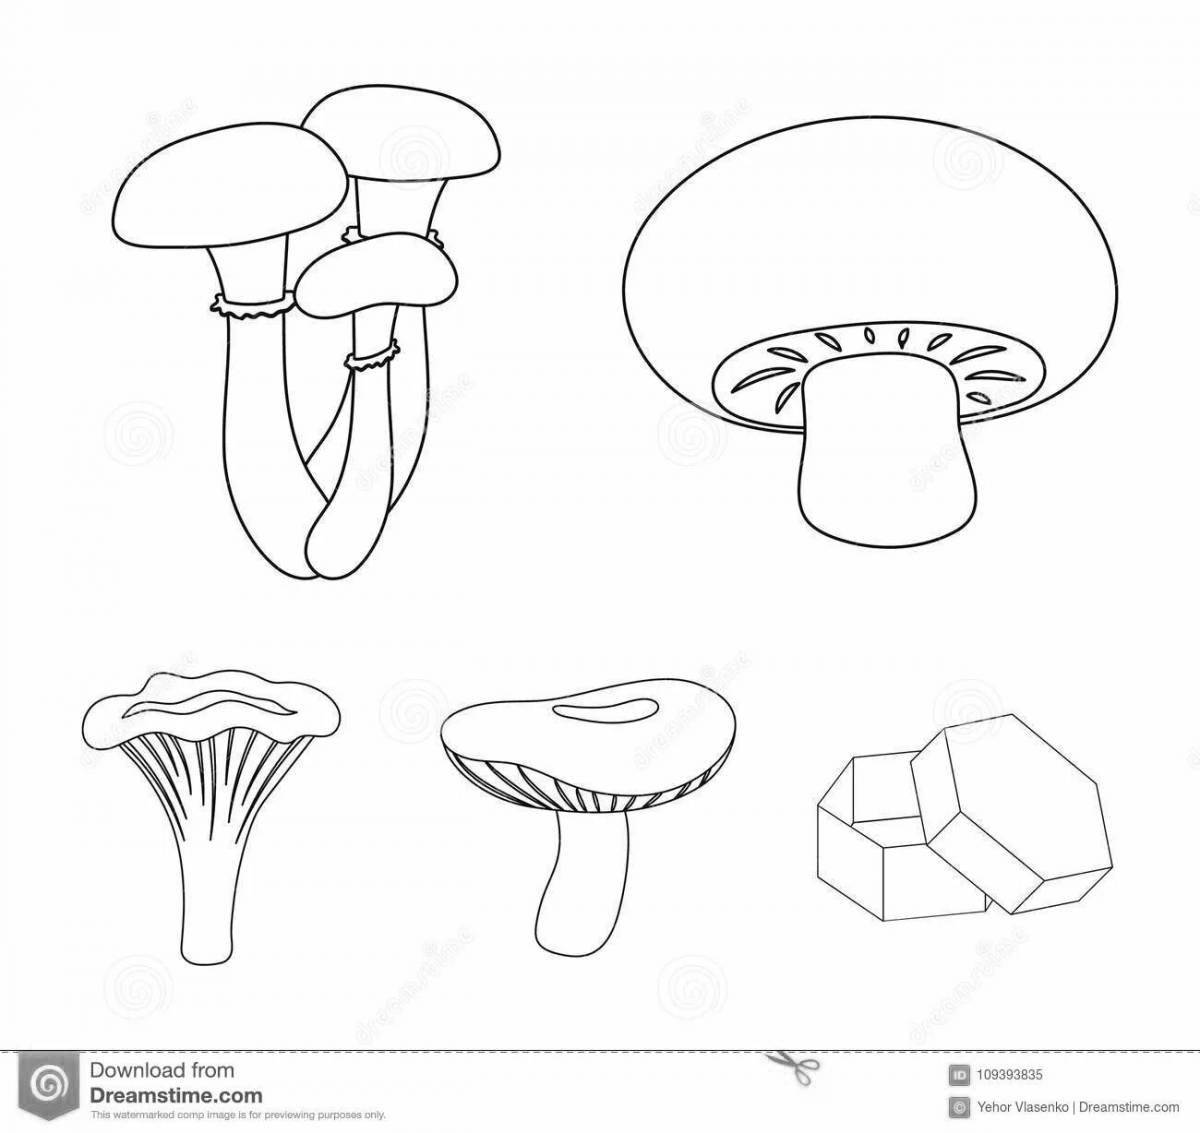 Coloring page sparkling russula